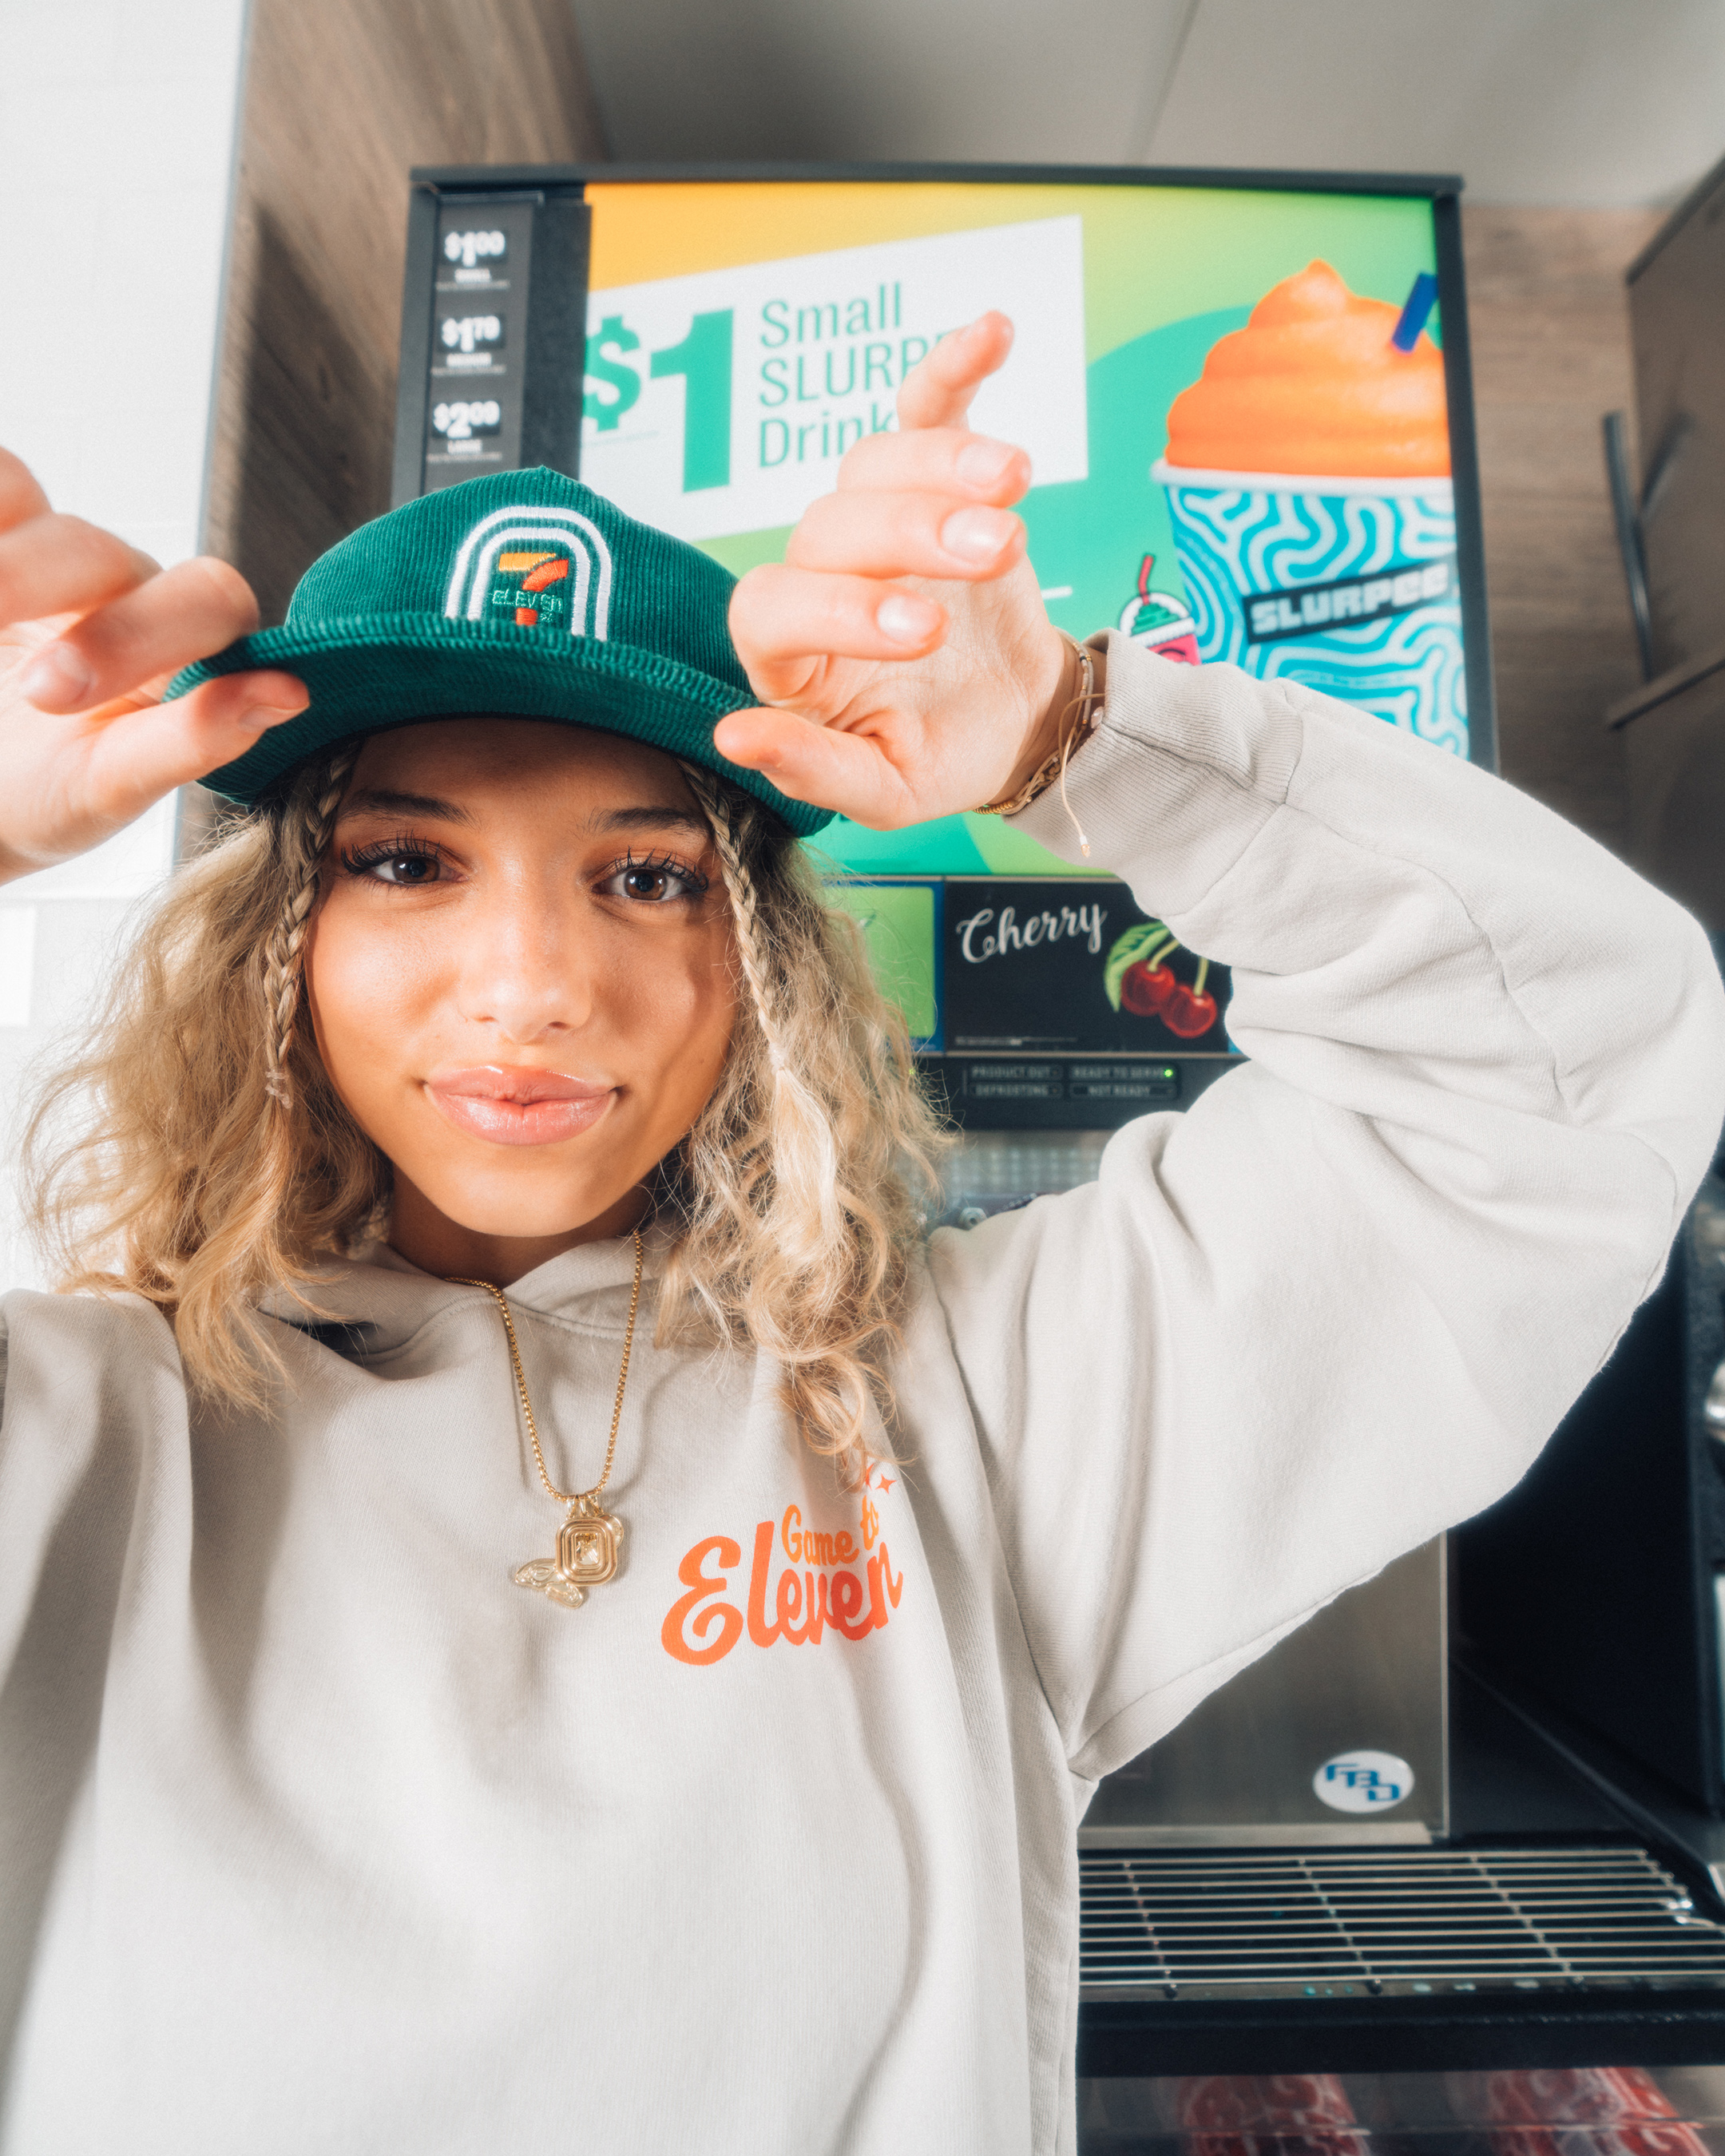 Basketball-Inspired Capsule Inspired by 7-Eleven and Speedway Stores